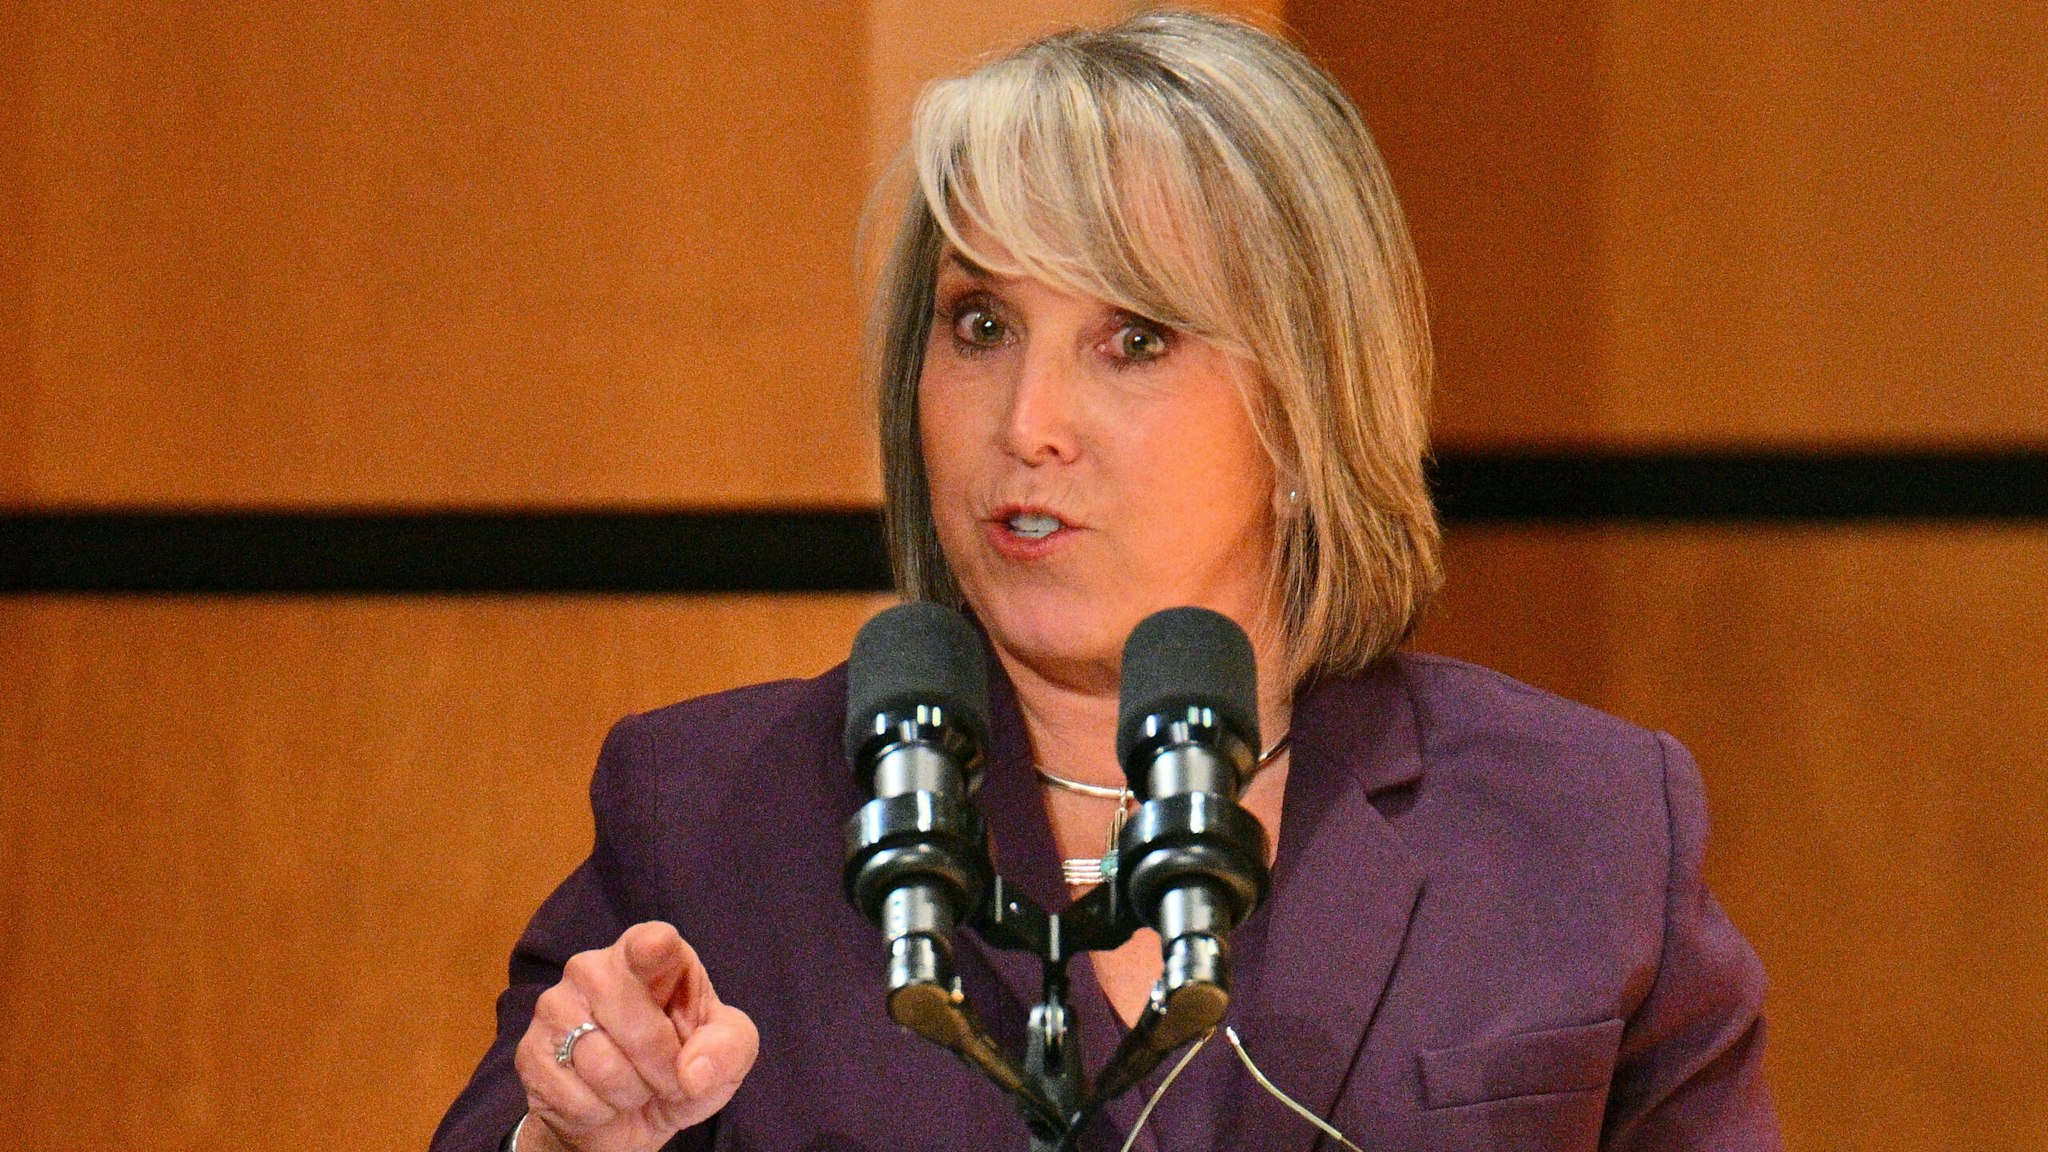 Michelle Lujan Grisham, governor of New Mexico, speaks during a conversation on protecting reproductive rights at the University of New Mexico in Albuquerque, New Mexico, US, on Tuesday, Oct. 25, 2022. The Biden administration has sought to spotlight efforts to protect abortion access after the Supreme Court struck down Roe v. Wade earlier this year, the landmark ruling that had guaranteed abortion rights for nearly 50 years.